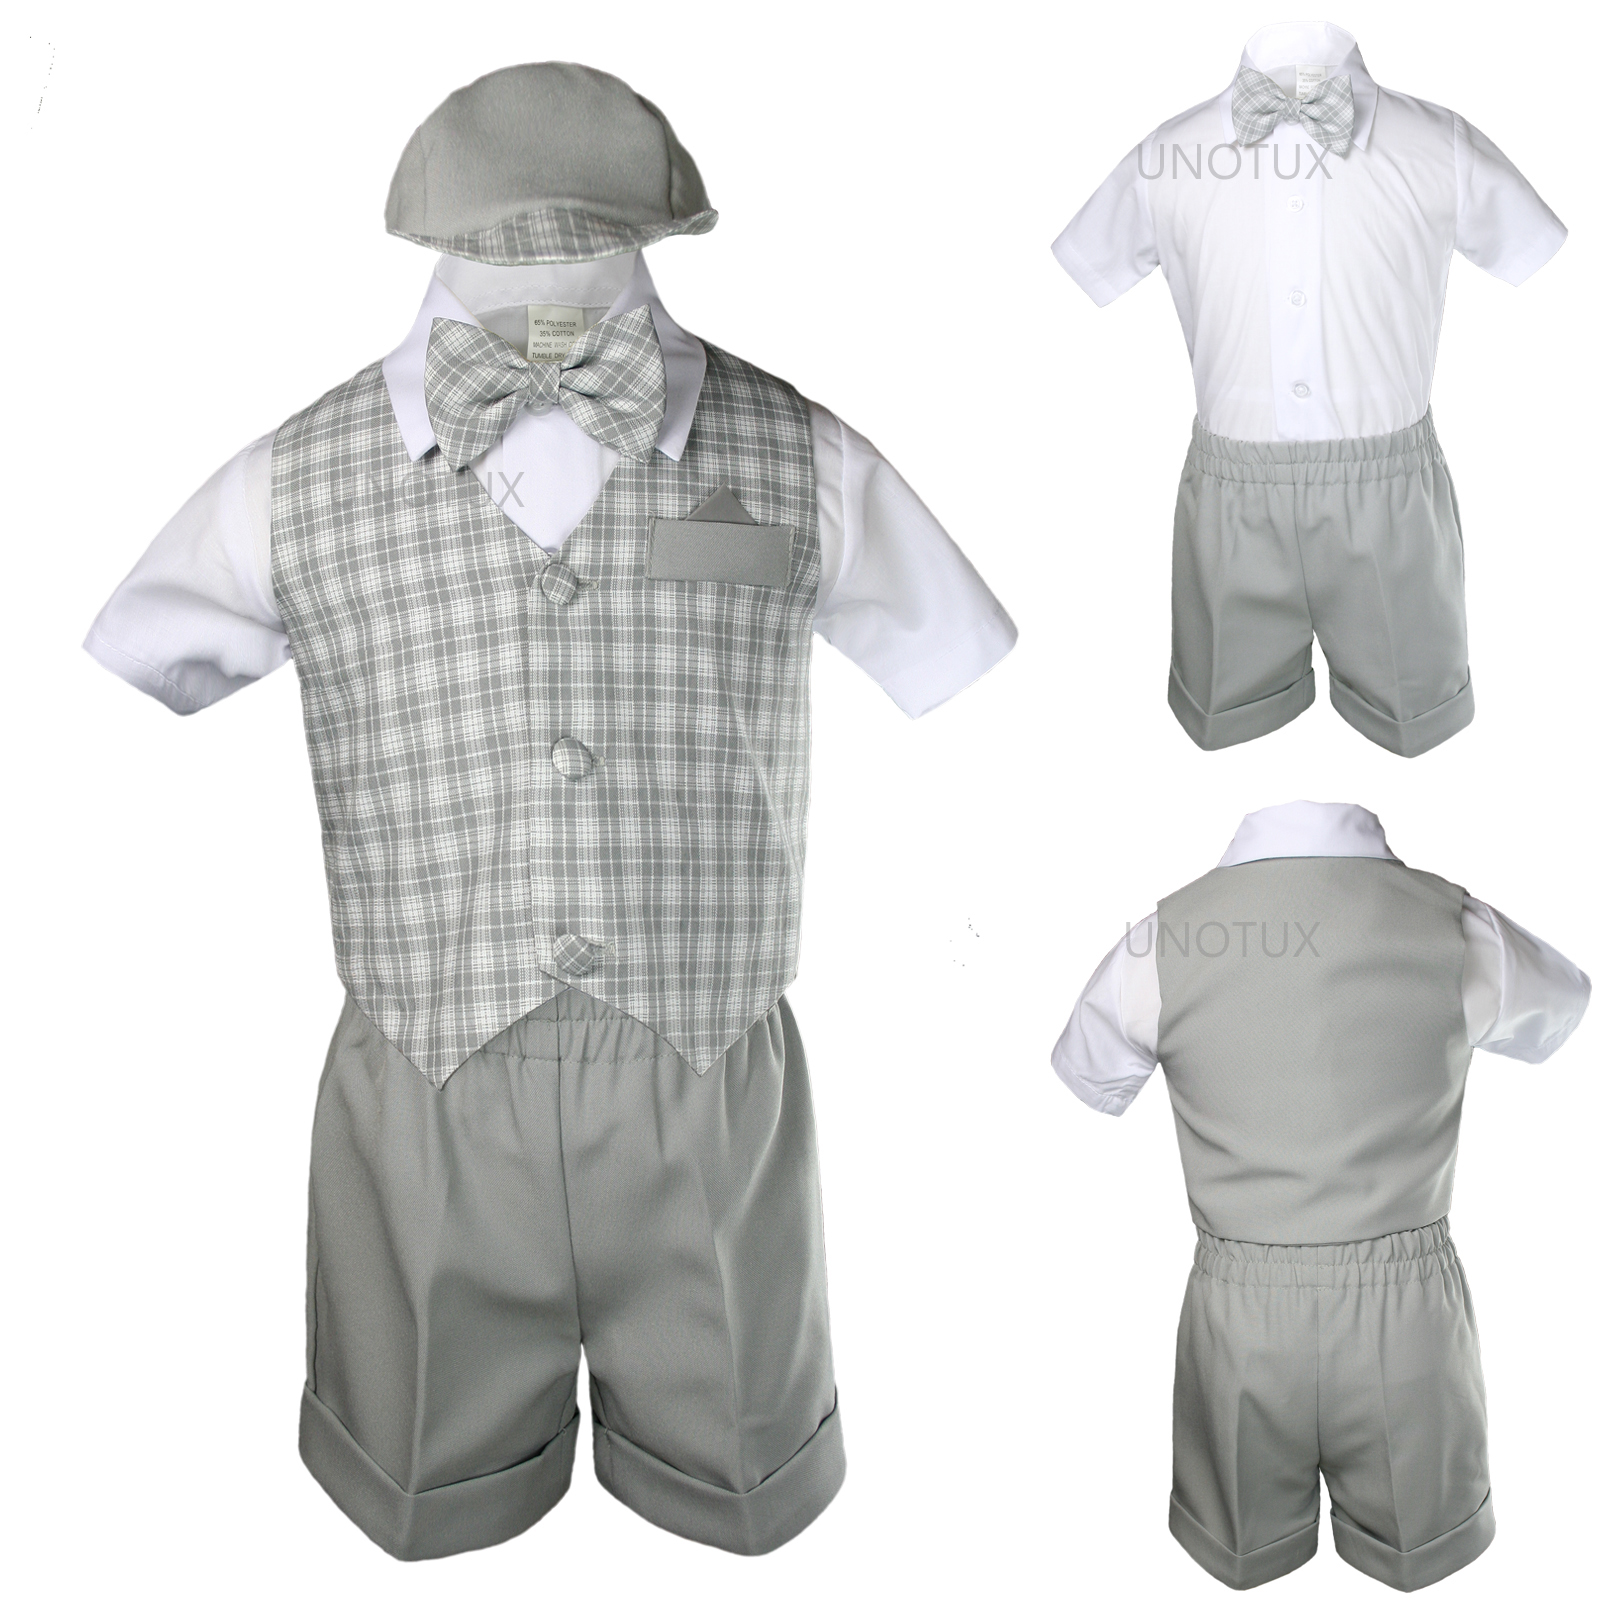 Unotux S M L XL 2T 3T 4T New Silver Gray Baby Infant Toddler 5pc Formal Summer Wedding Vest Shorts Set Gingham Boy Suit Bow Tie